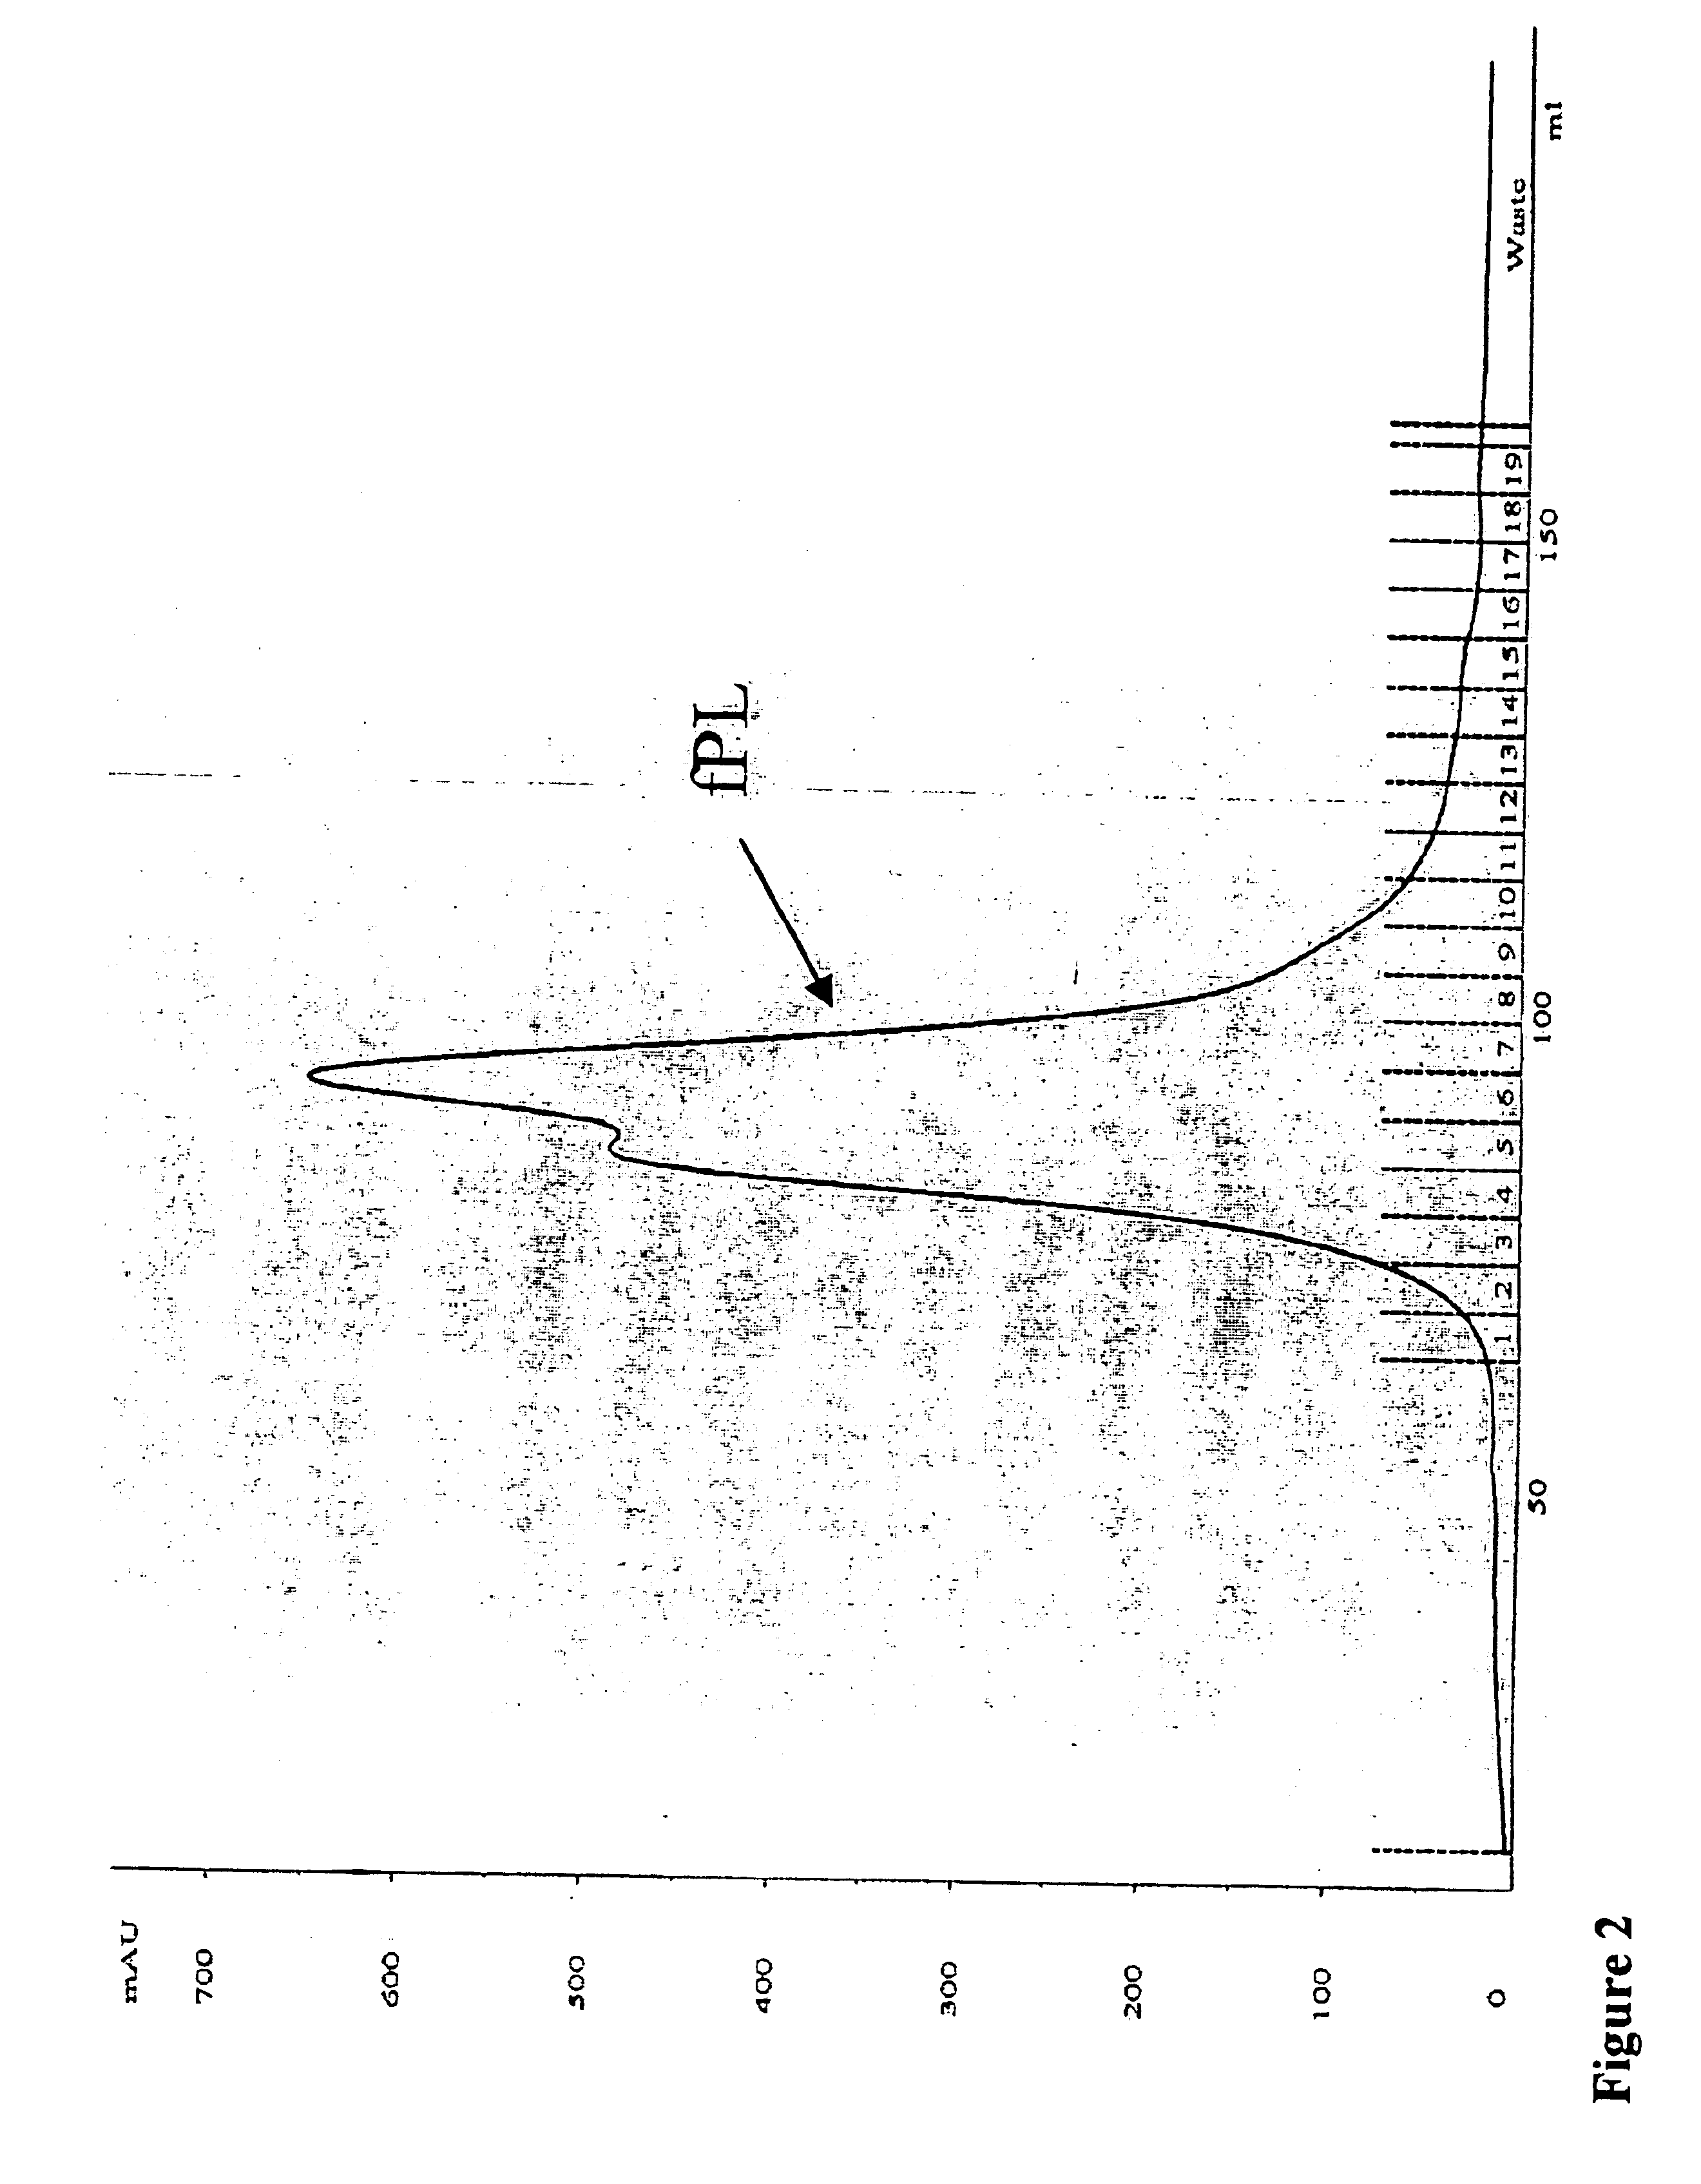 Feline pancreatic lipase composition and method of preparing and using such composition